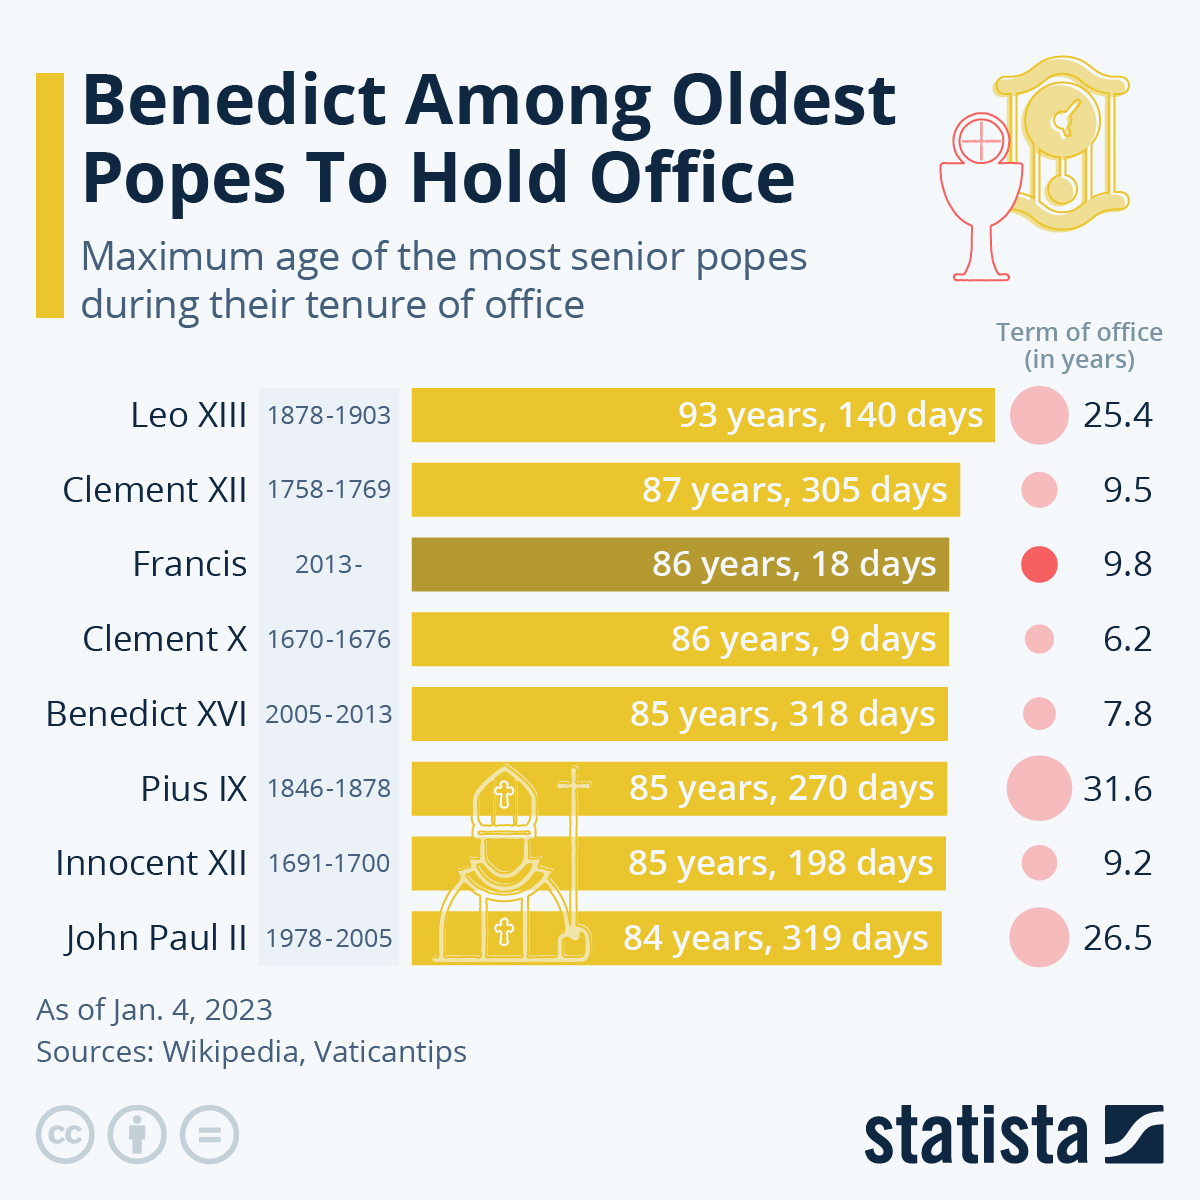 Benedict among the Oldest Popes to take Office Responsibilities